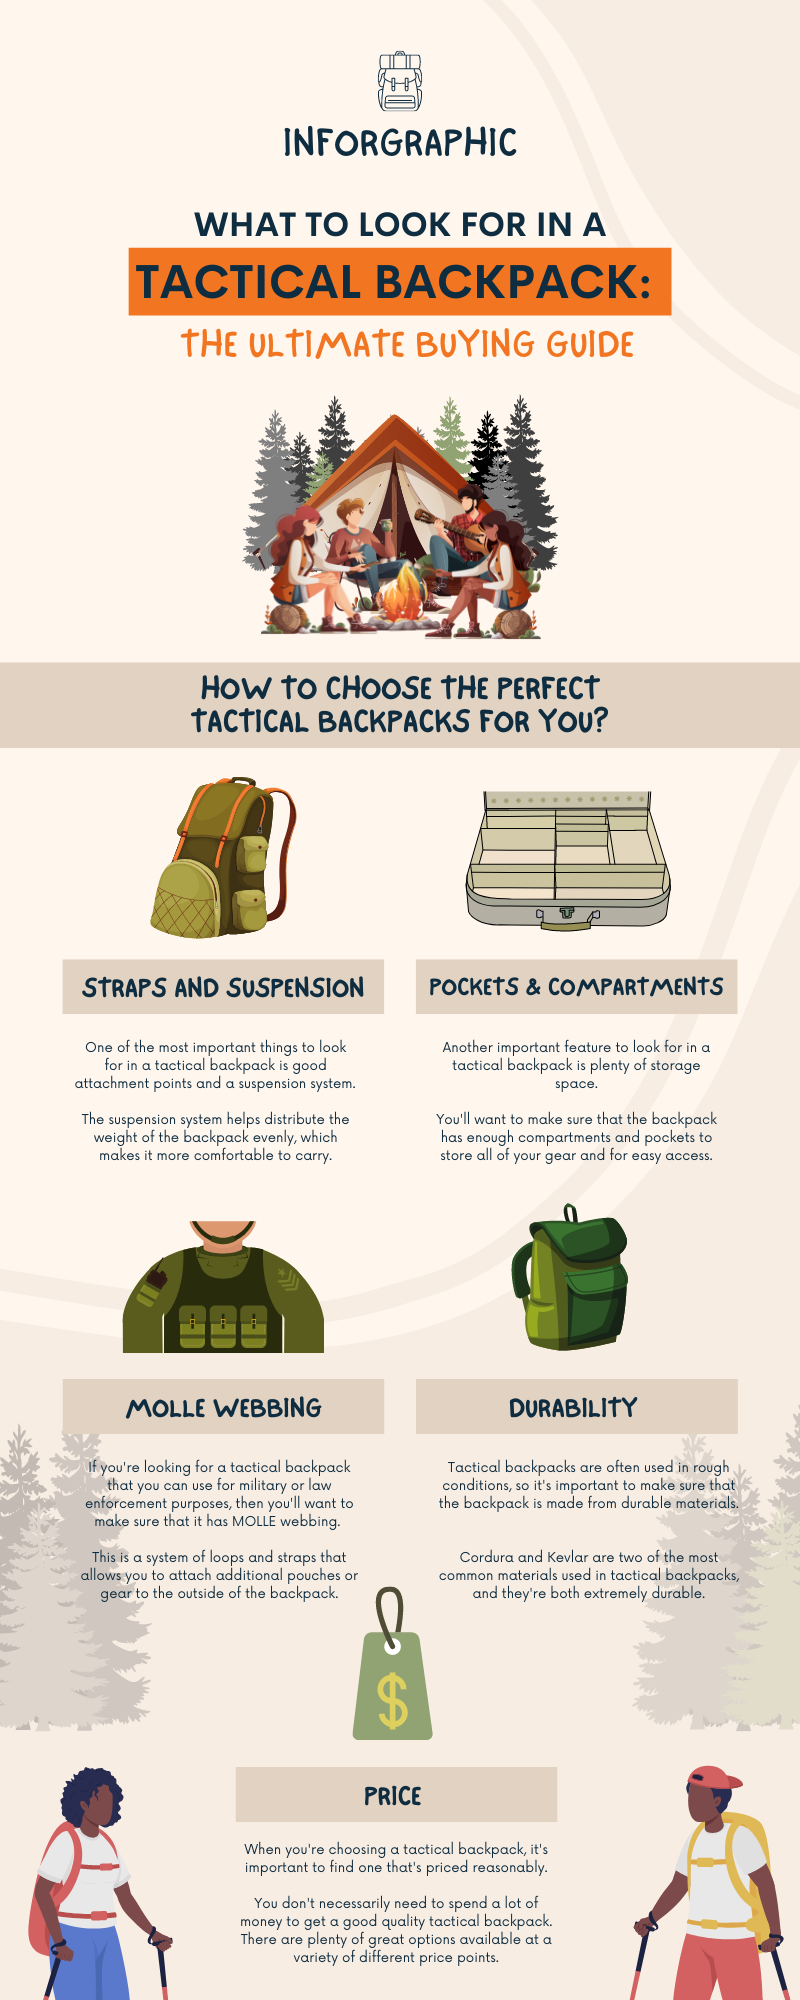 What to Look for in a Tactical Backpack